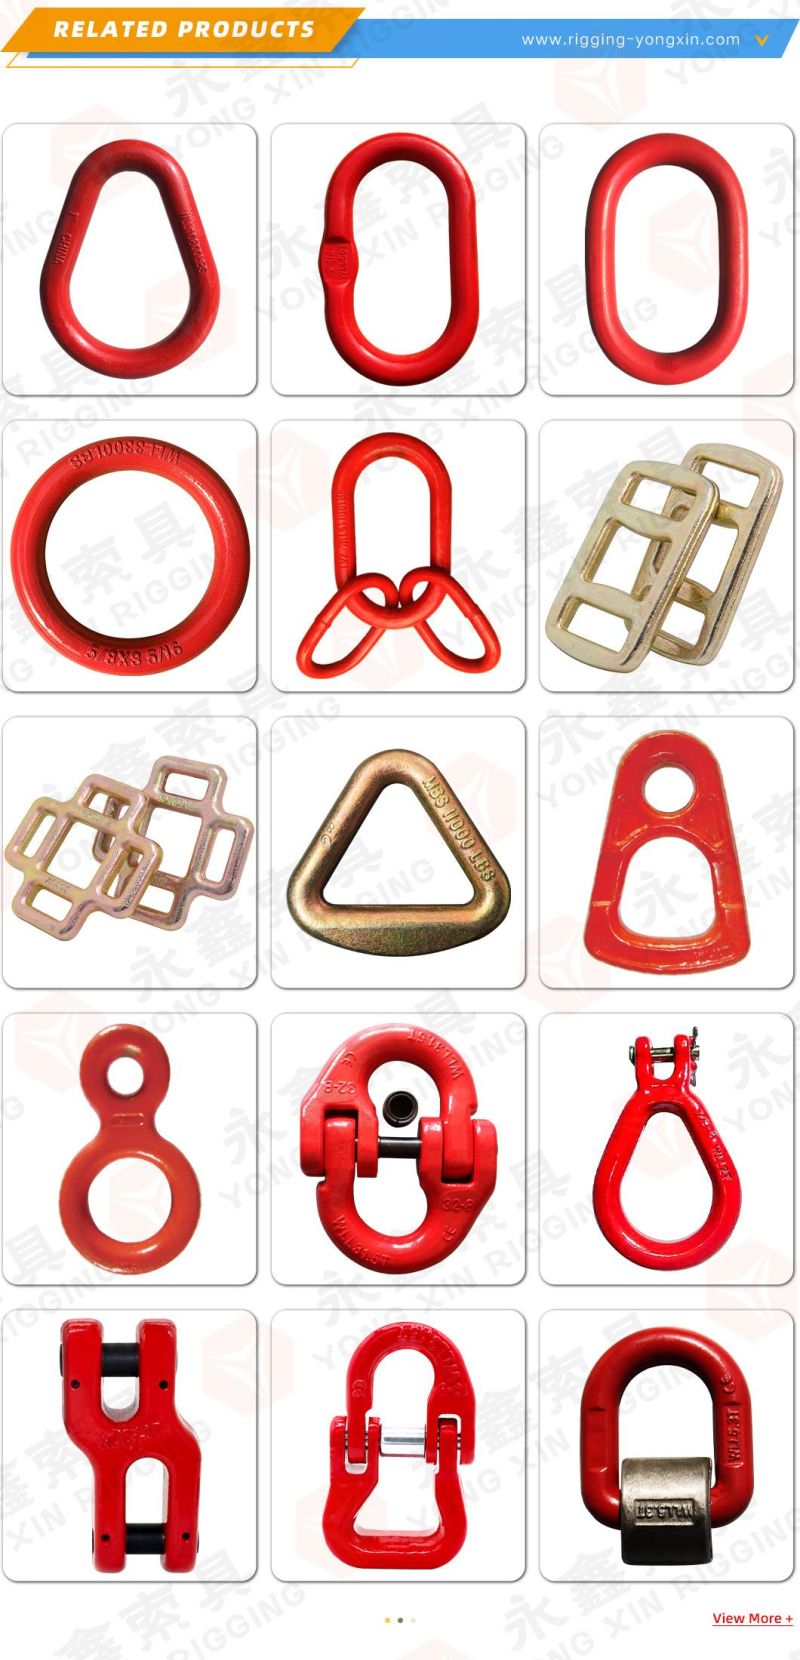 G80 Germanic Type Connecting Link Hammerlock Coupling Chain Connector Rigging Hardware